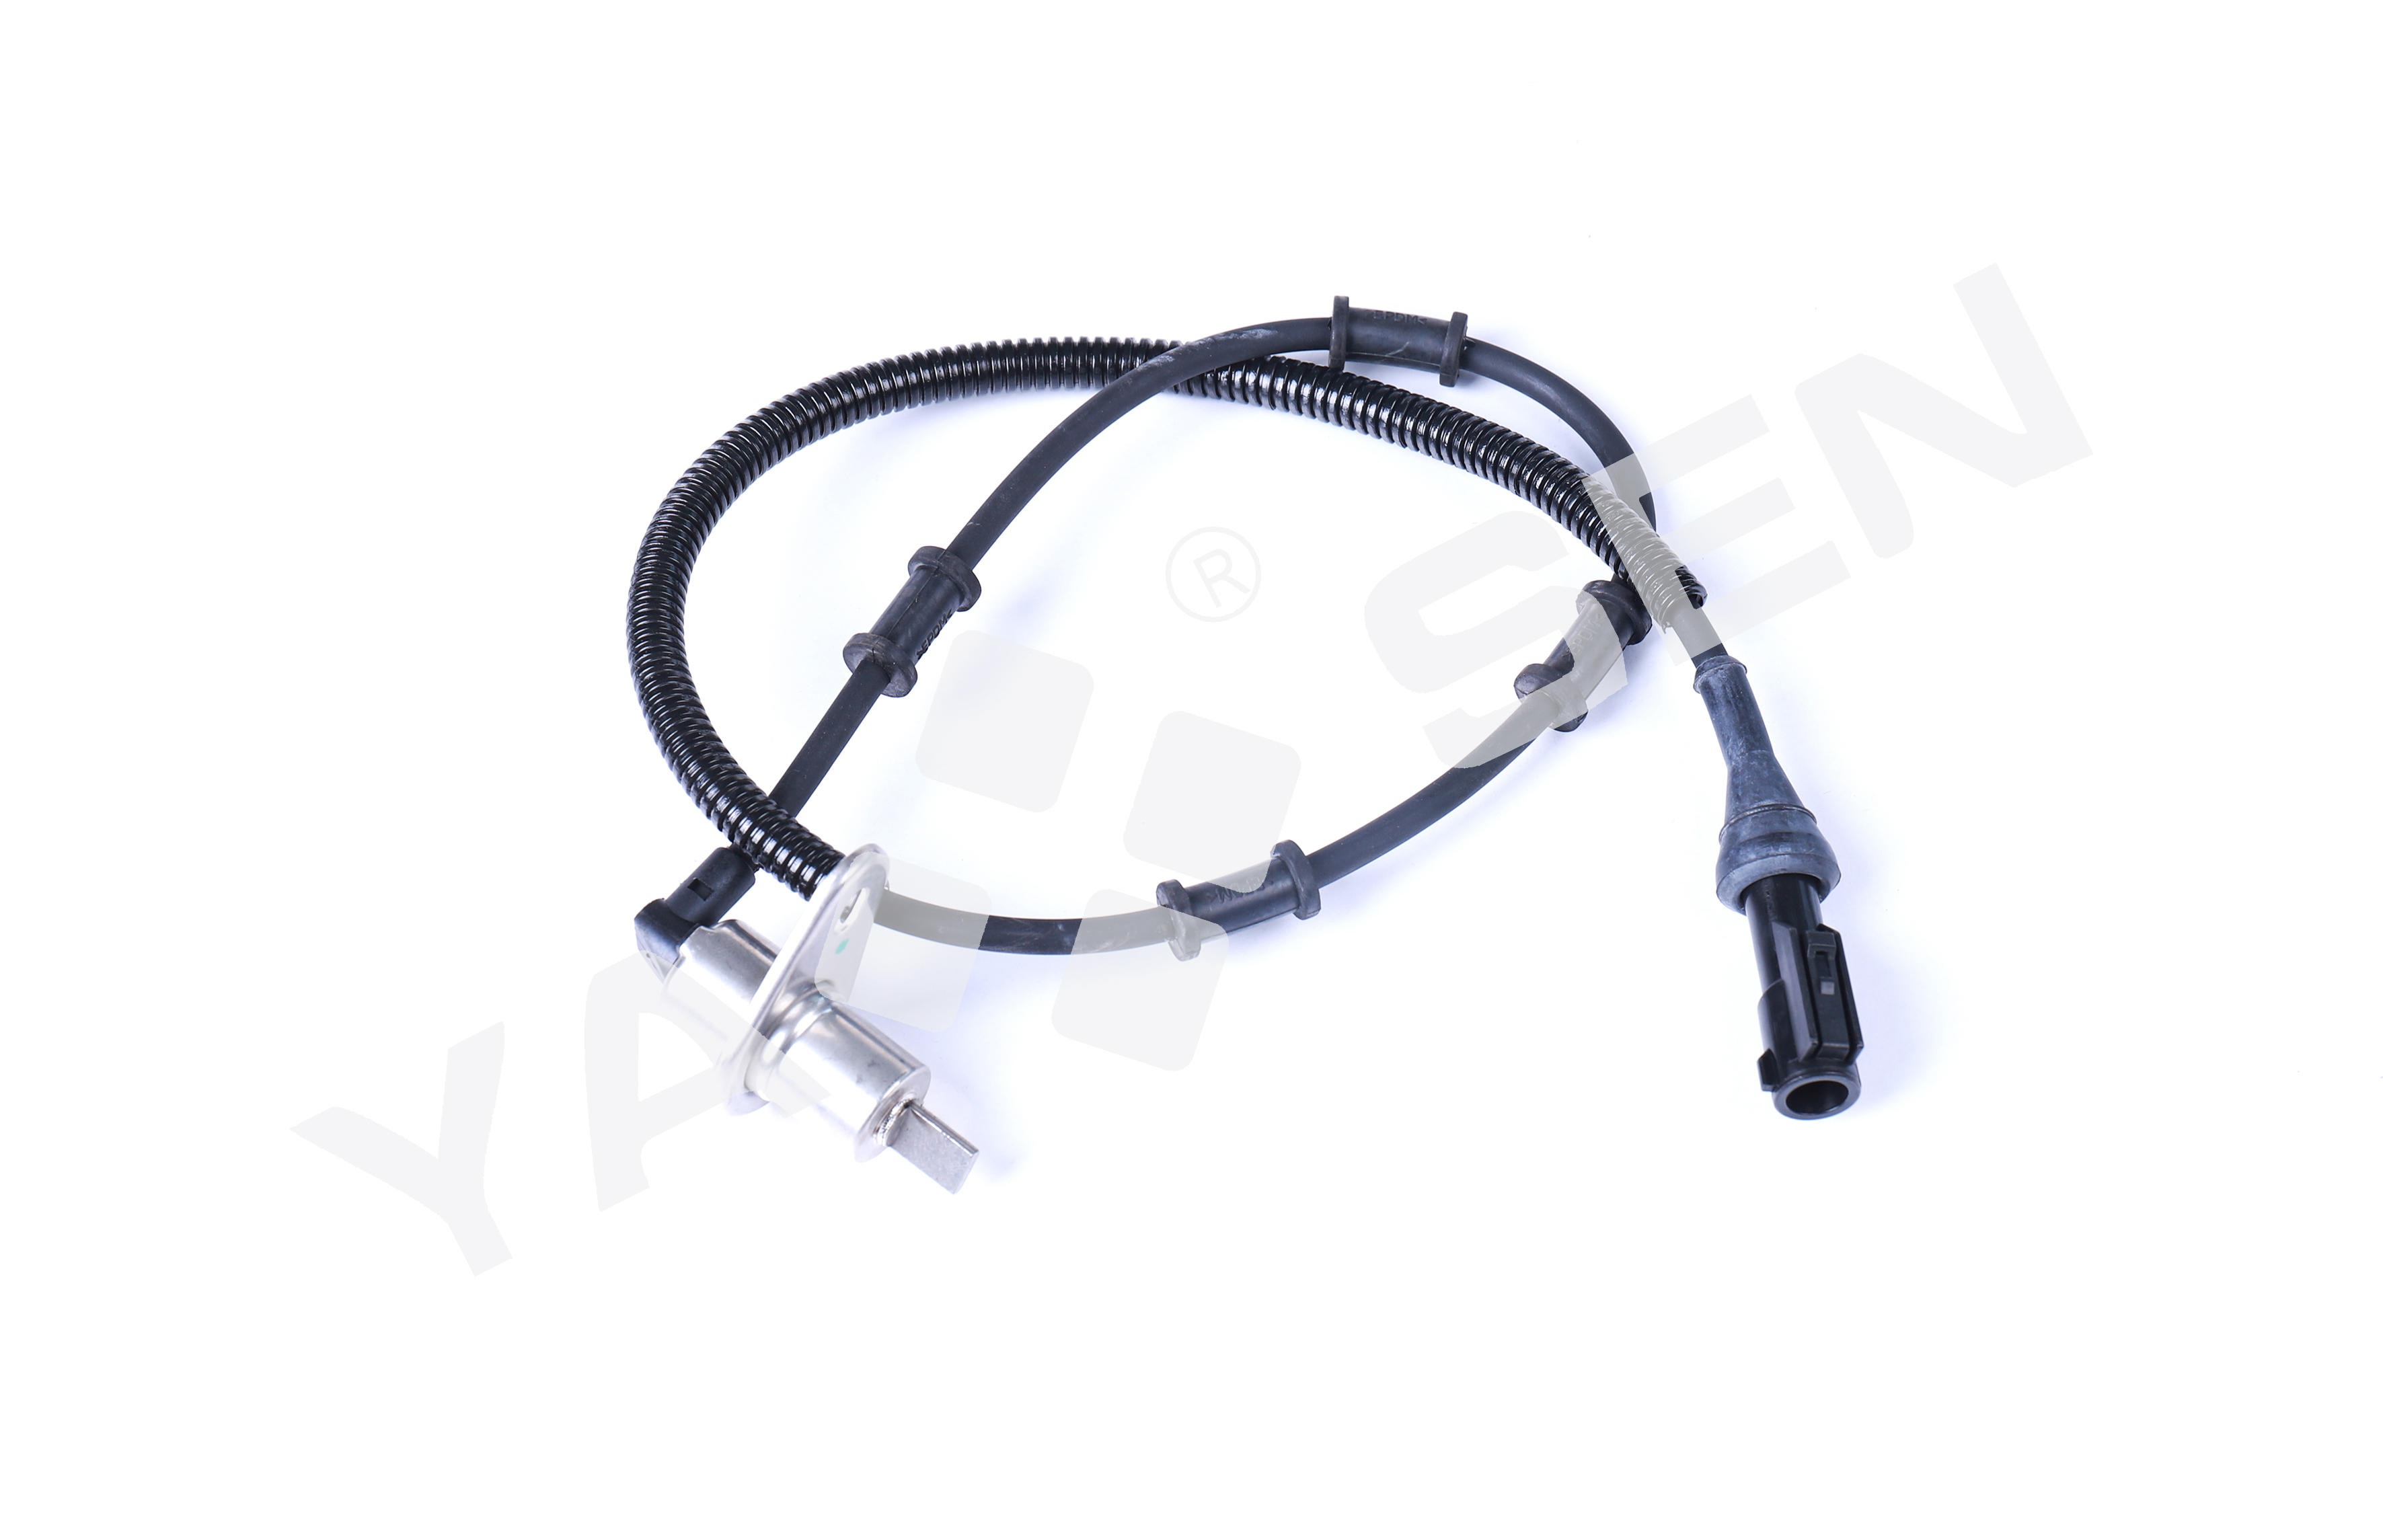 ABS Wheel Speed Sensor for FORD/DODGE  56028176AB 56028176AC 56028176AD 970-126 ALS35 5S7072 SU8564